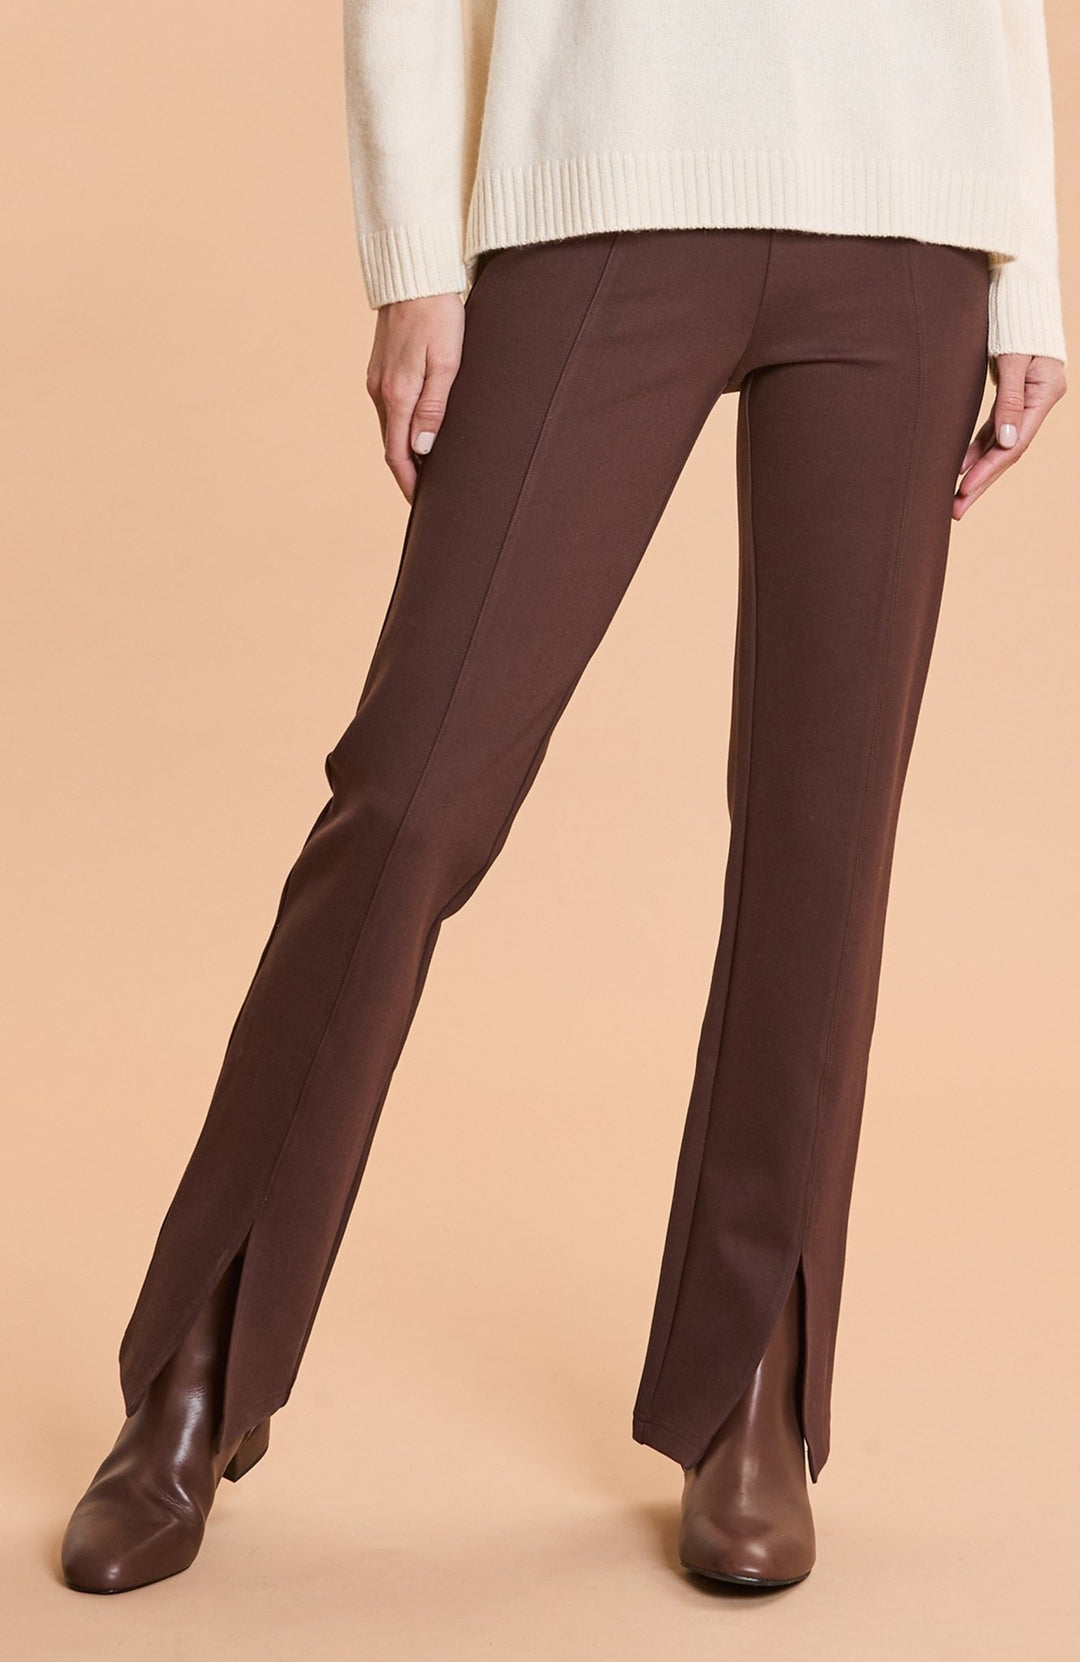 Tyler Boe - Margie Ponte Pant - Coffee - Shorely Chic Boutique